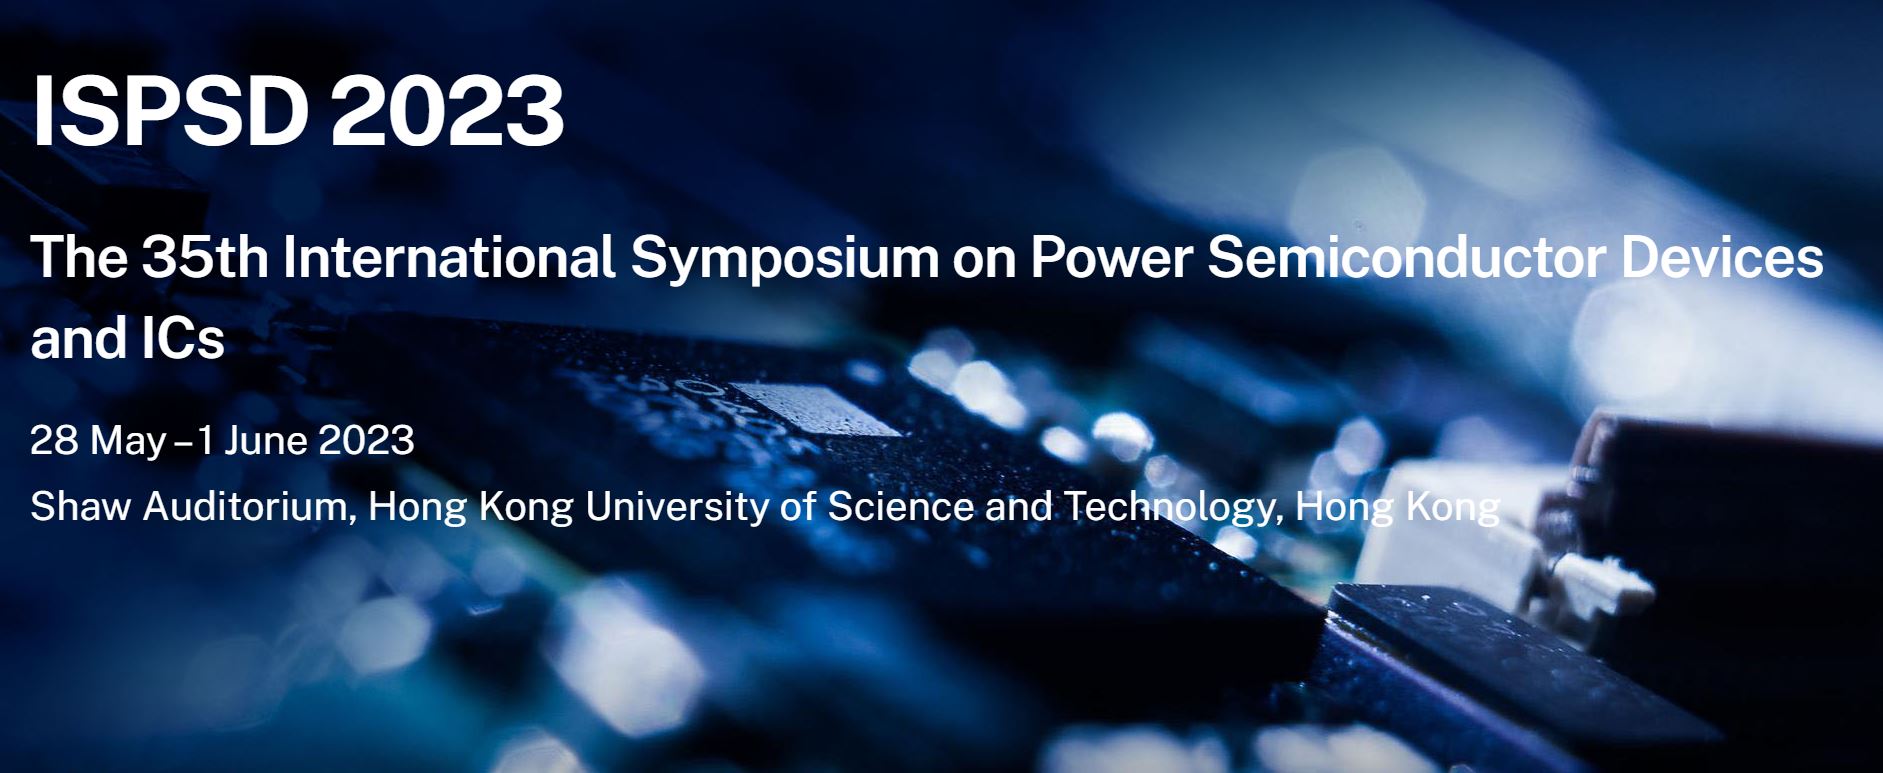 ISPSD: International Symposium on Power Semiconductor Devices and ICs - EXTENDED CALL FOR PAPERS